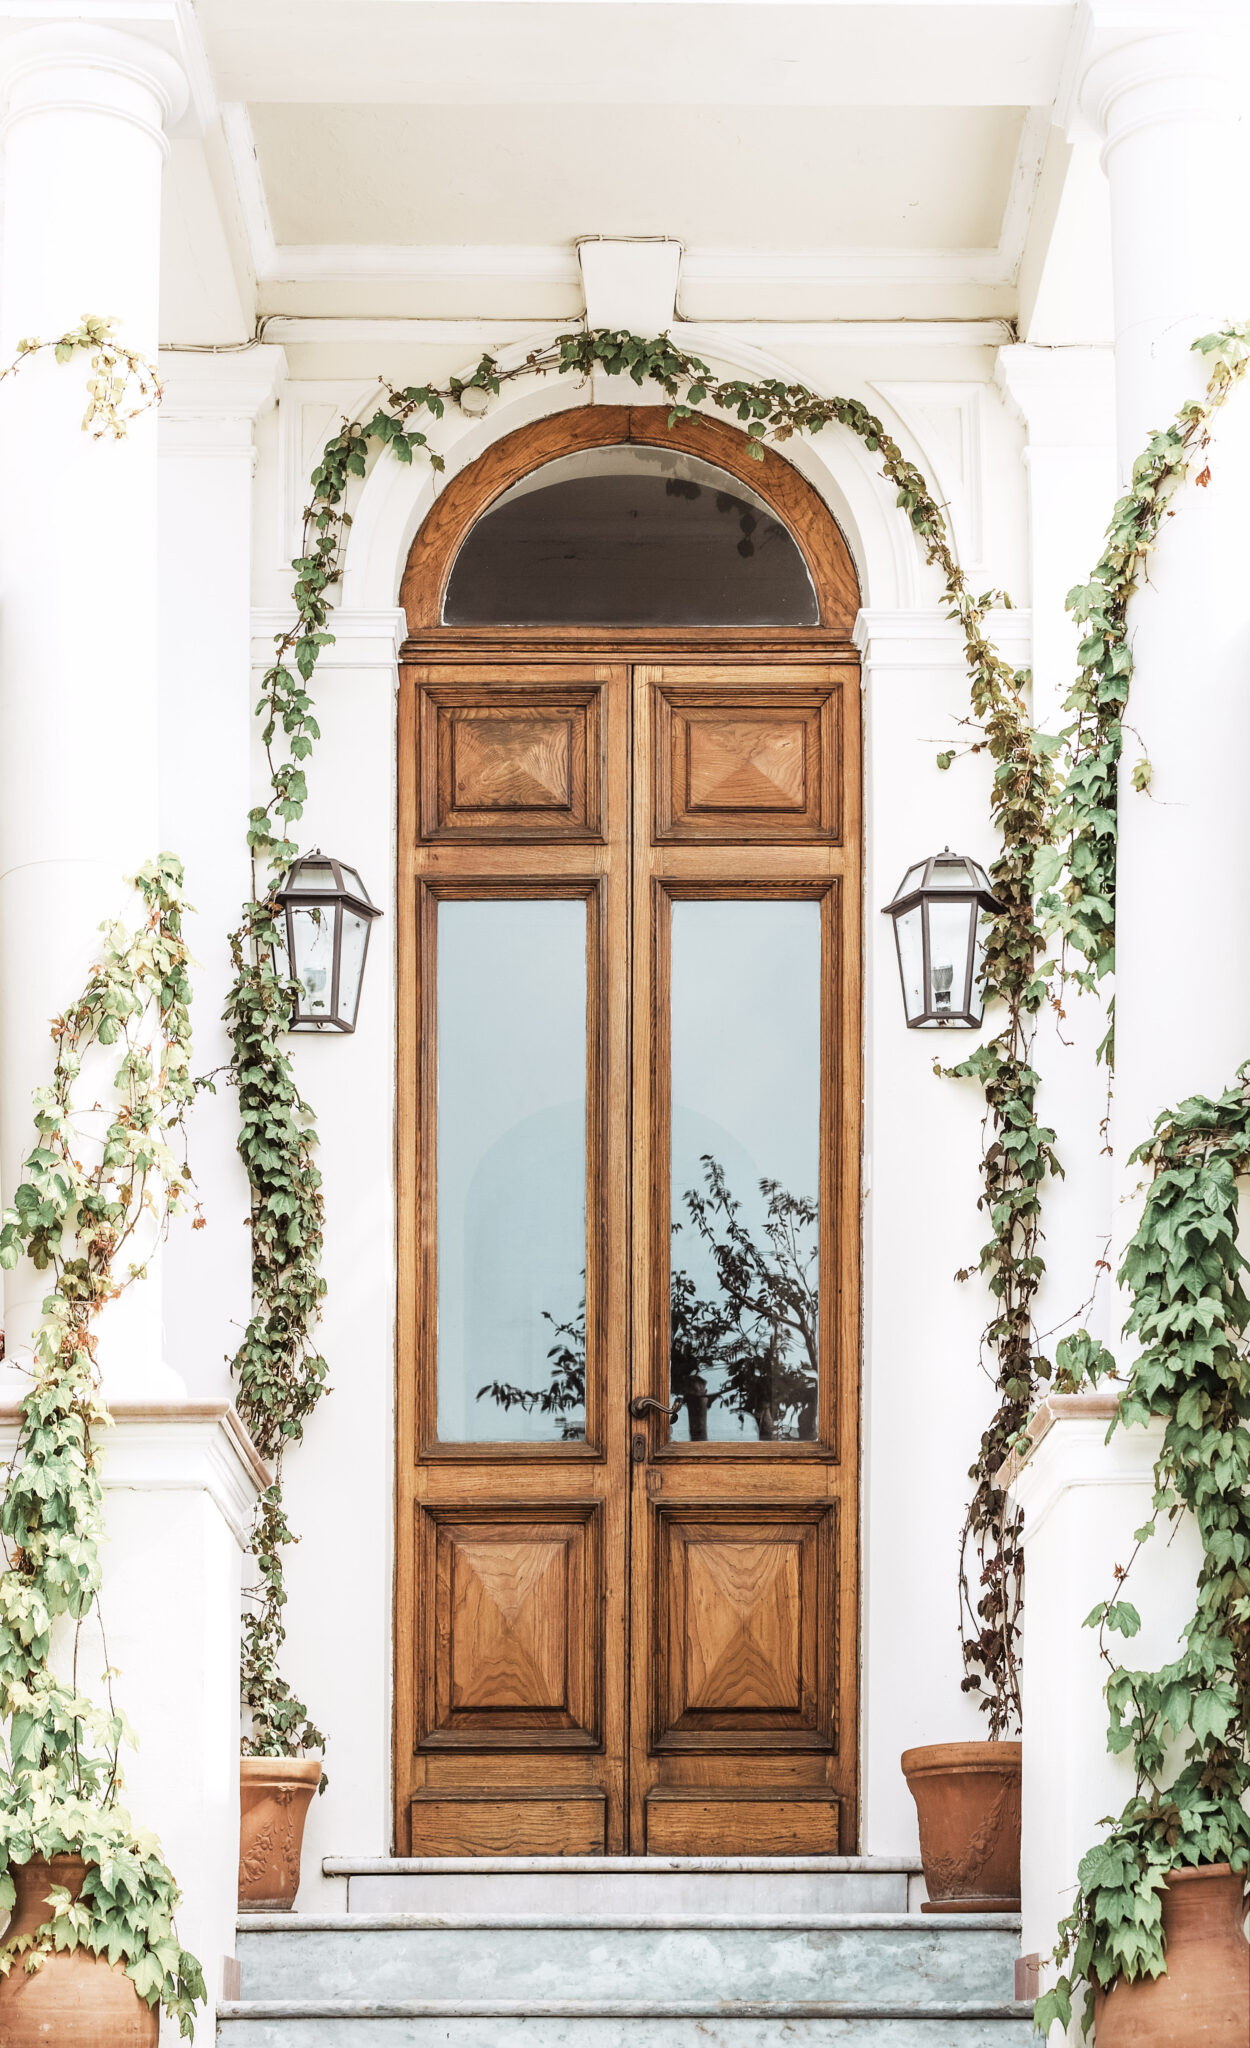 A beautiful and neutral doorway and exterior of a home. This article covers how to update your home's exterior.